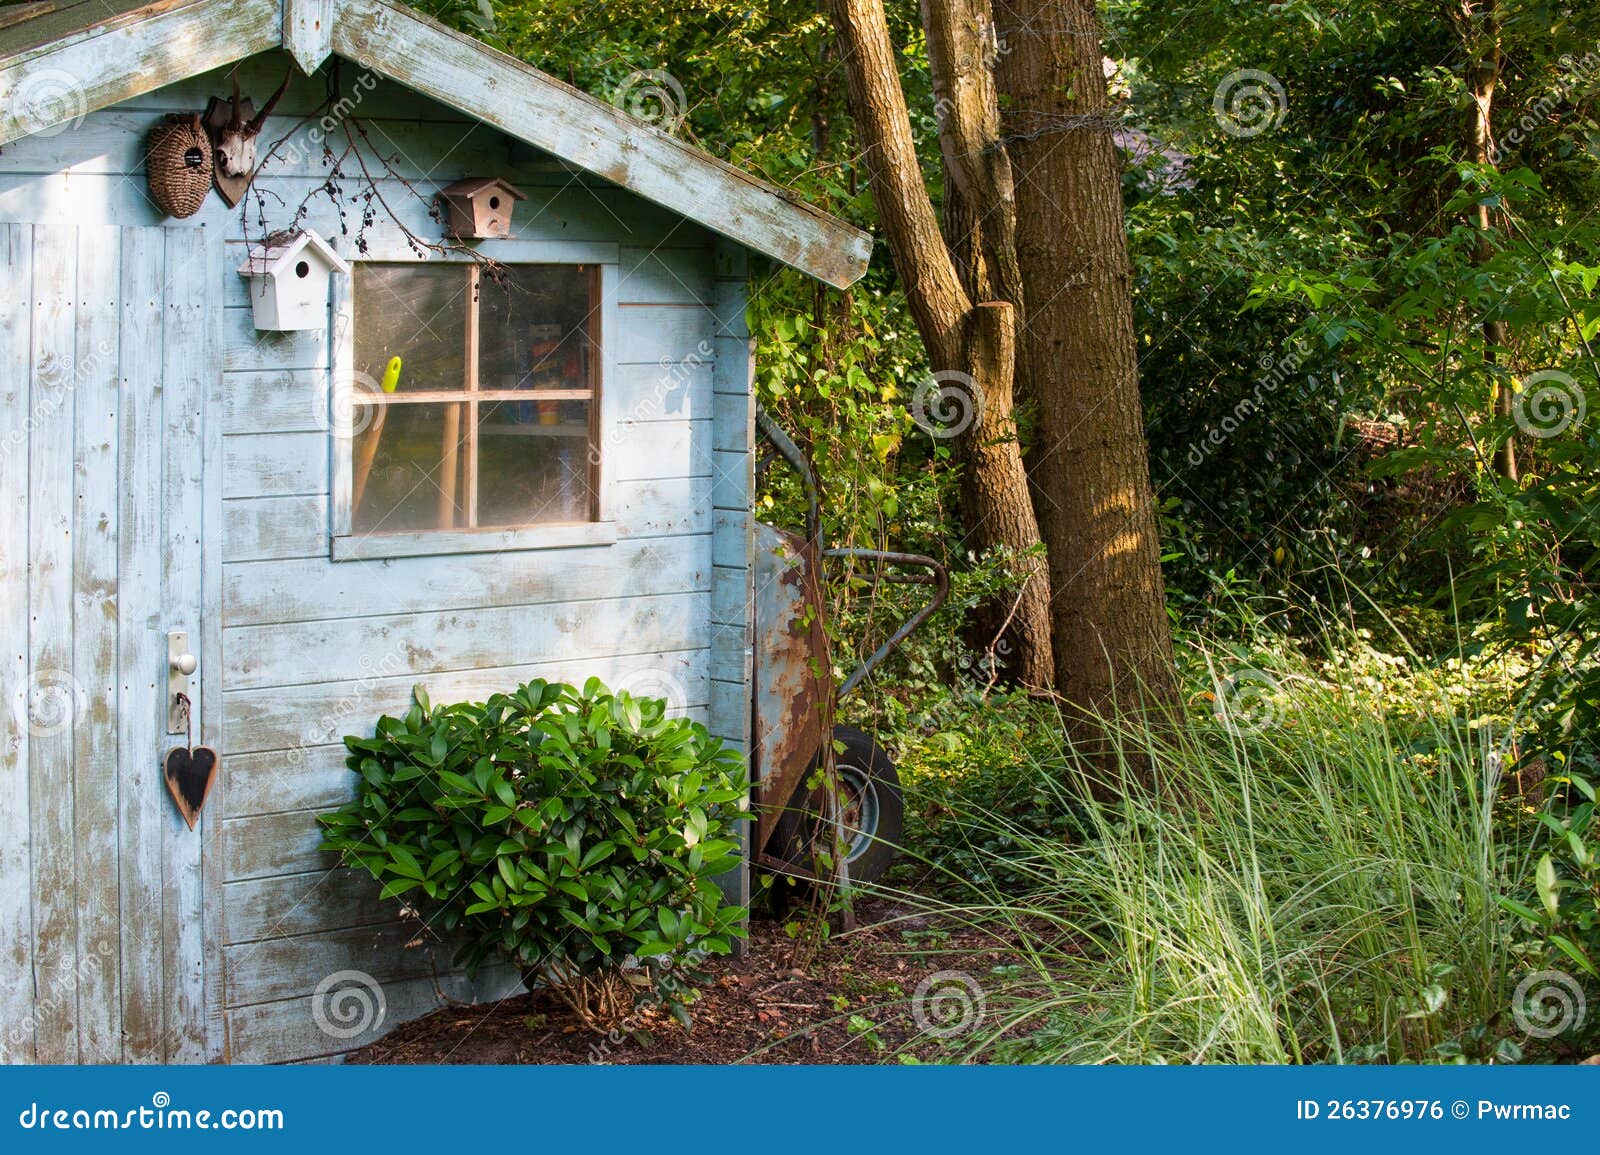 blue old garden shed stock photo. image of green, tool